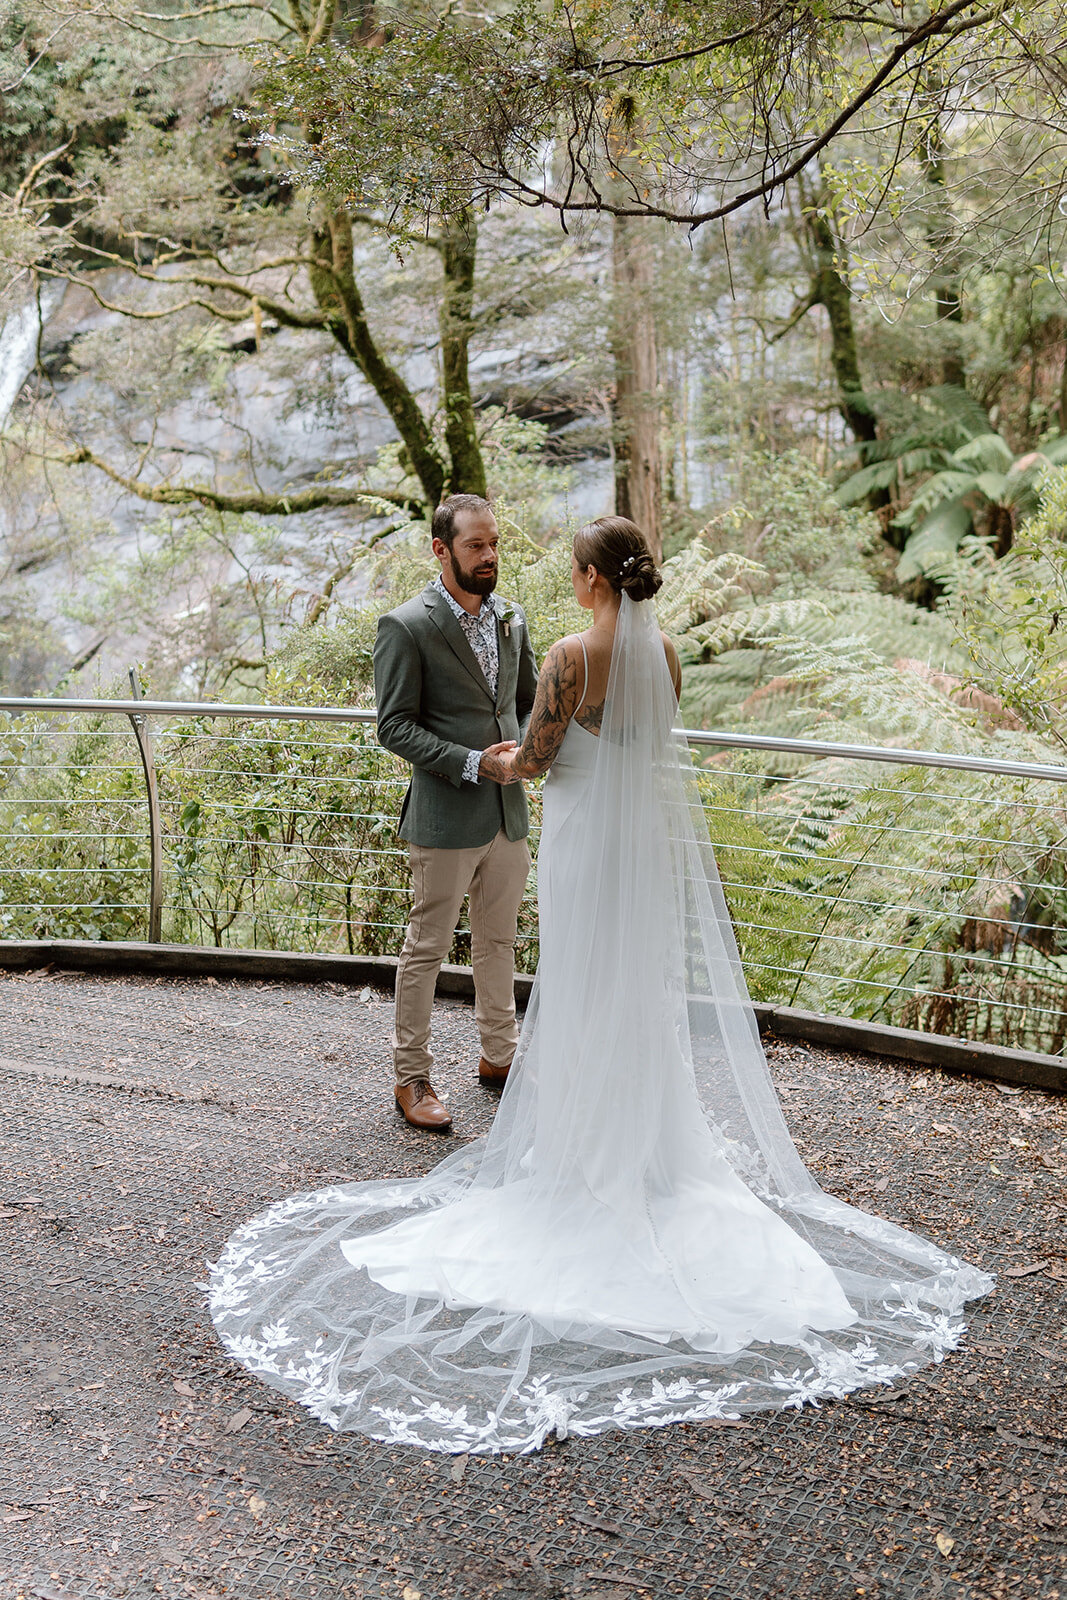 Stacey&Cory-Coast&Pines-108